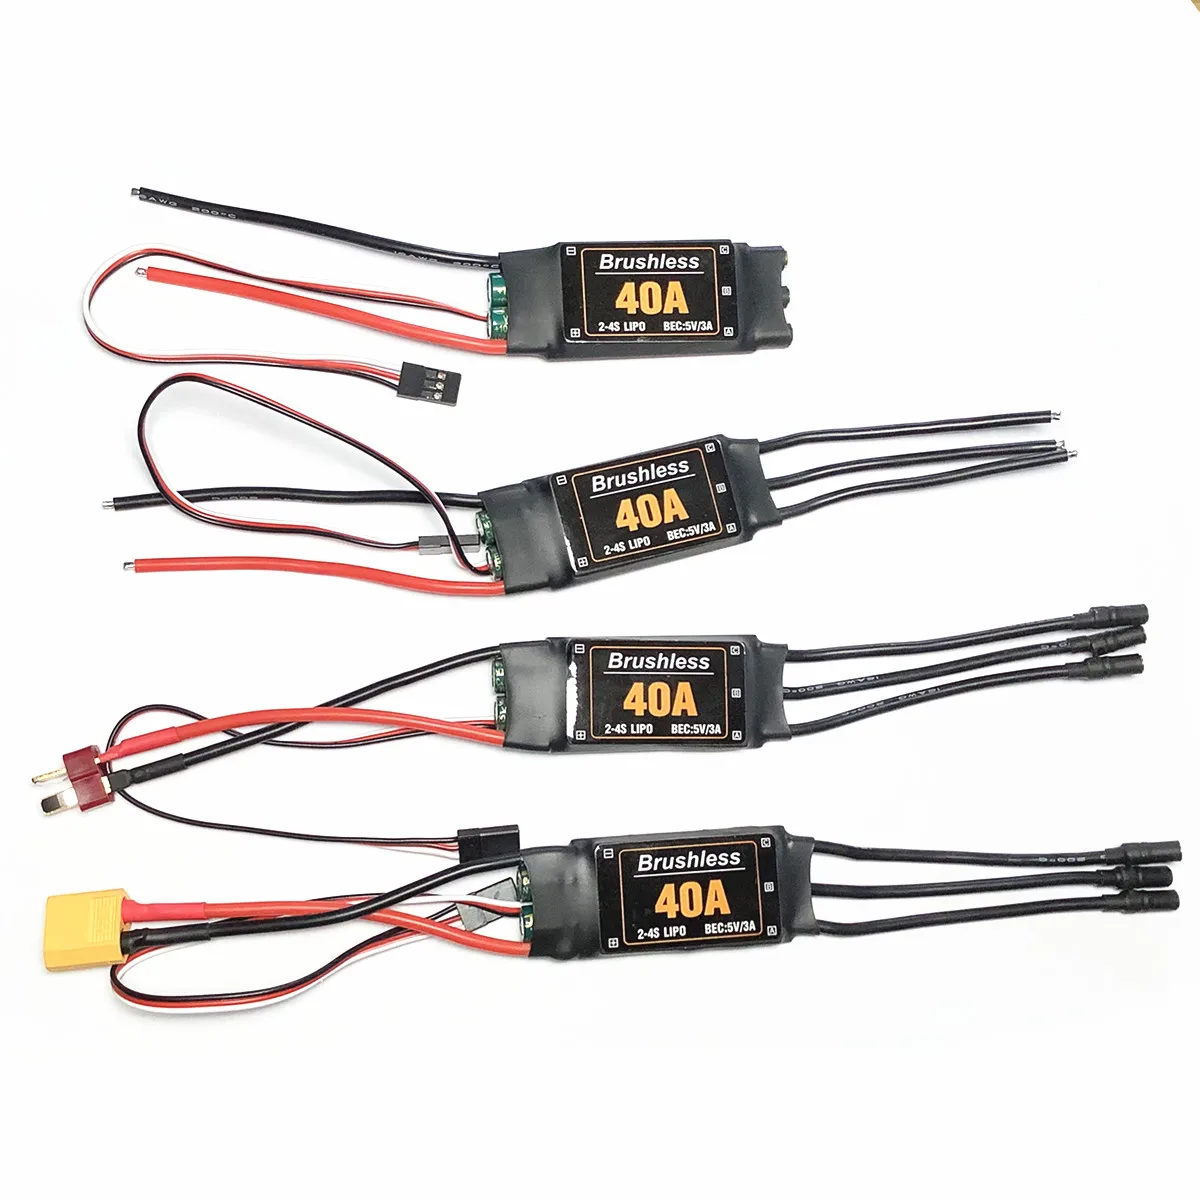 Ess esc drone airplanes parts components accessories speed controller motor rc toys fpv thumb200